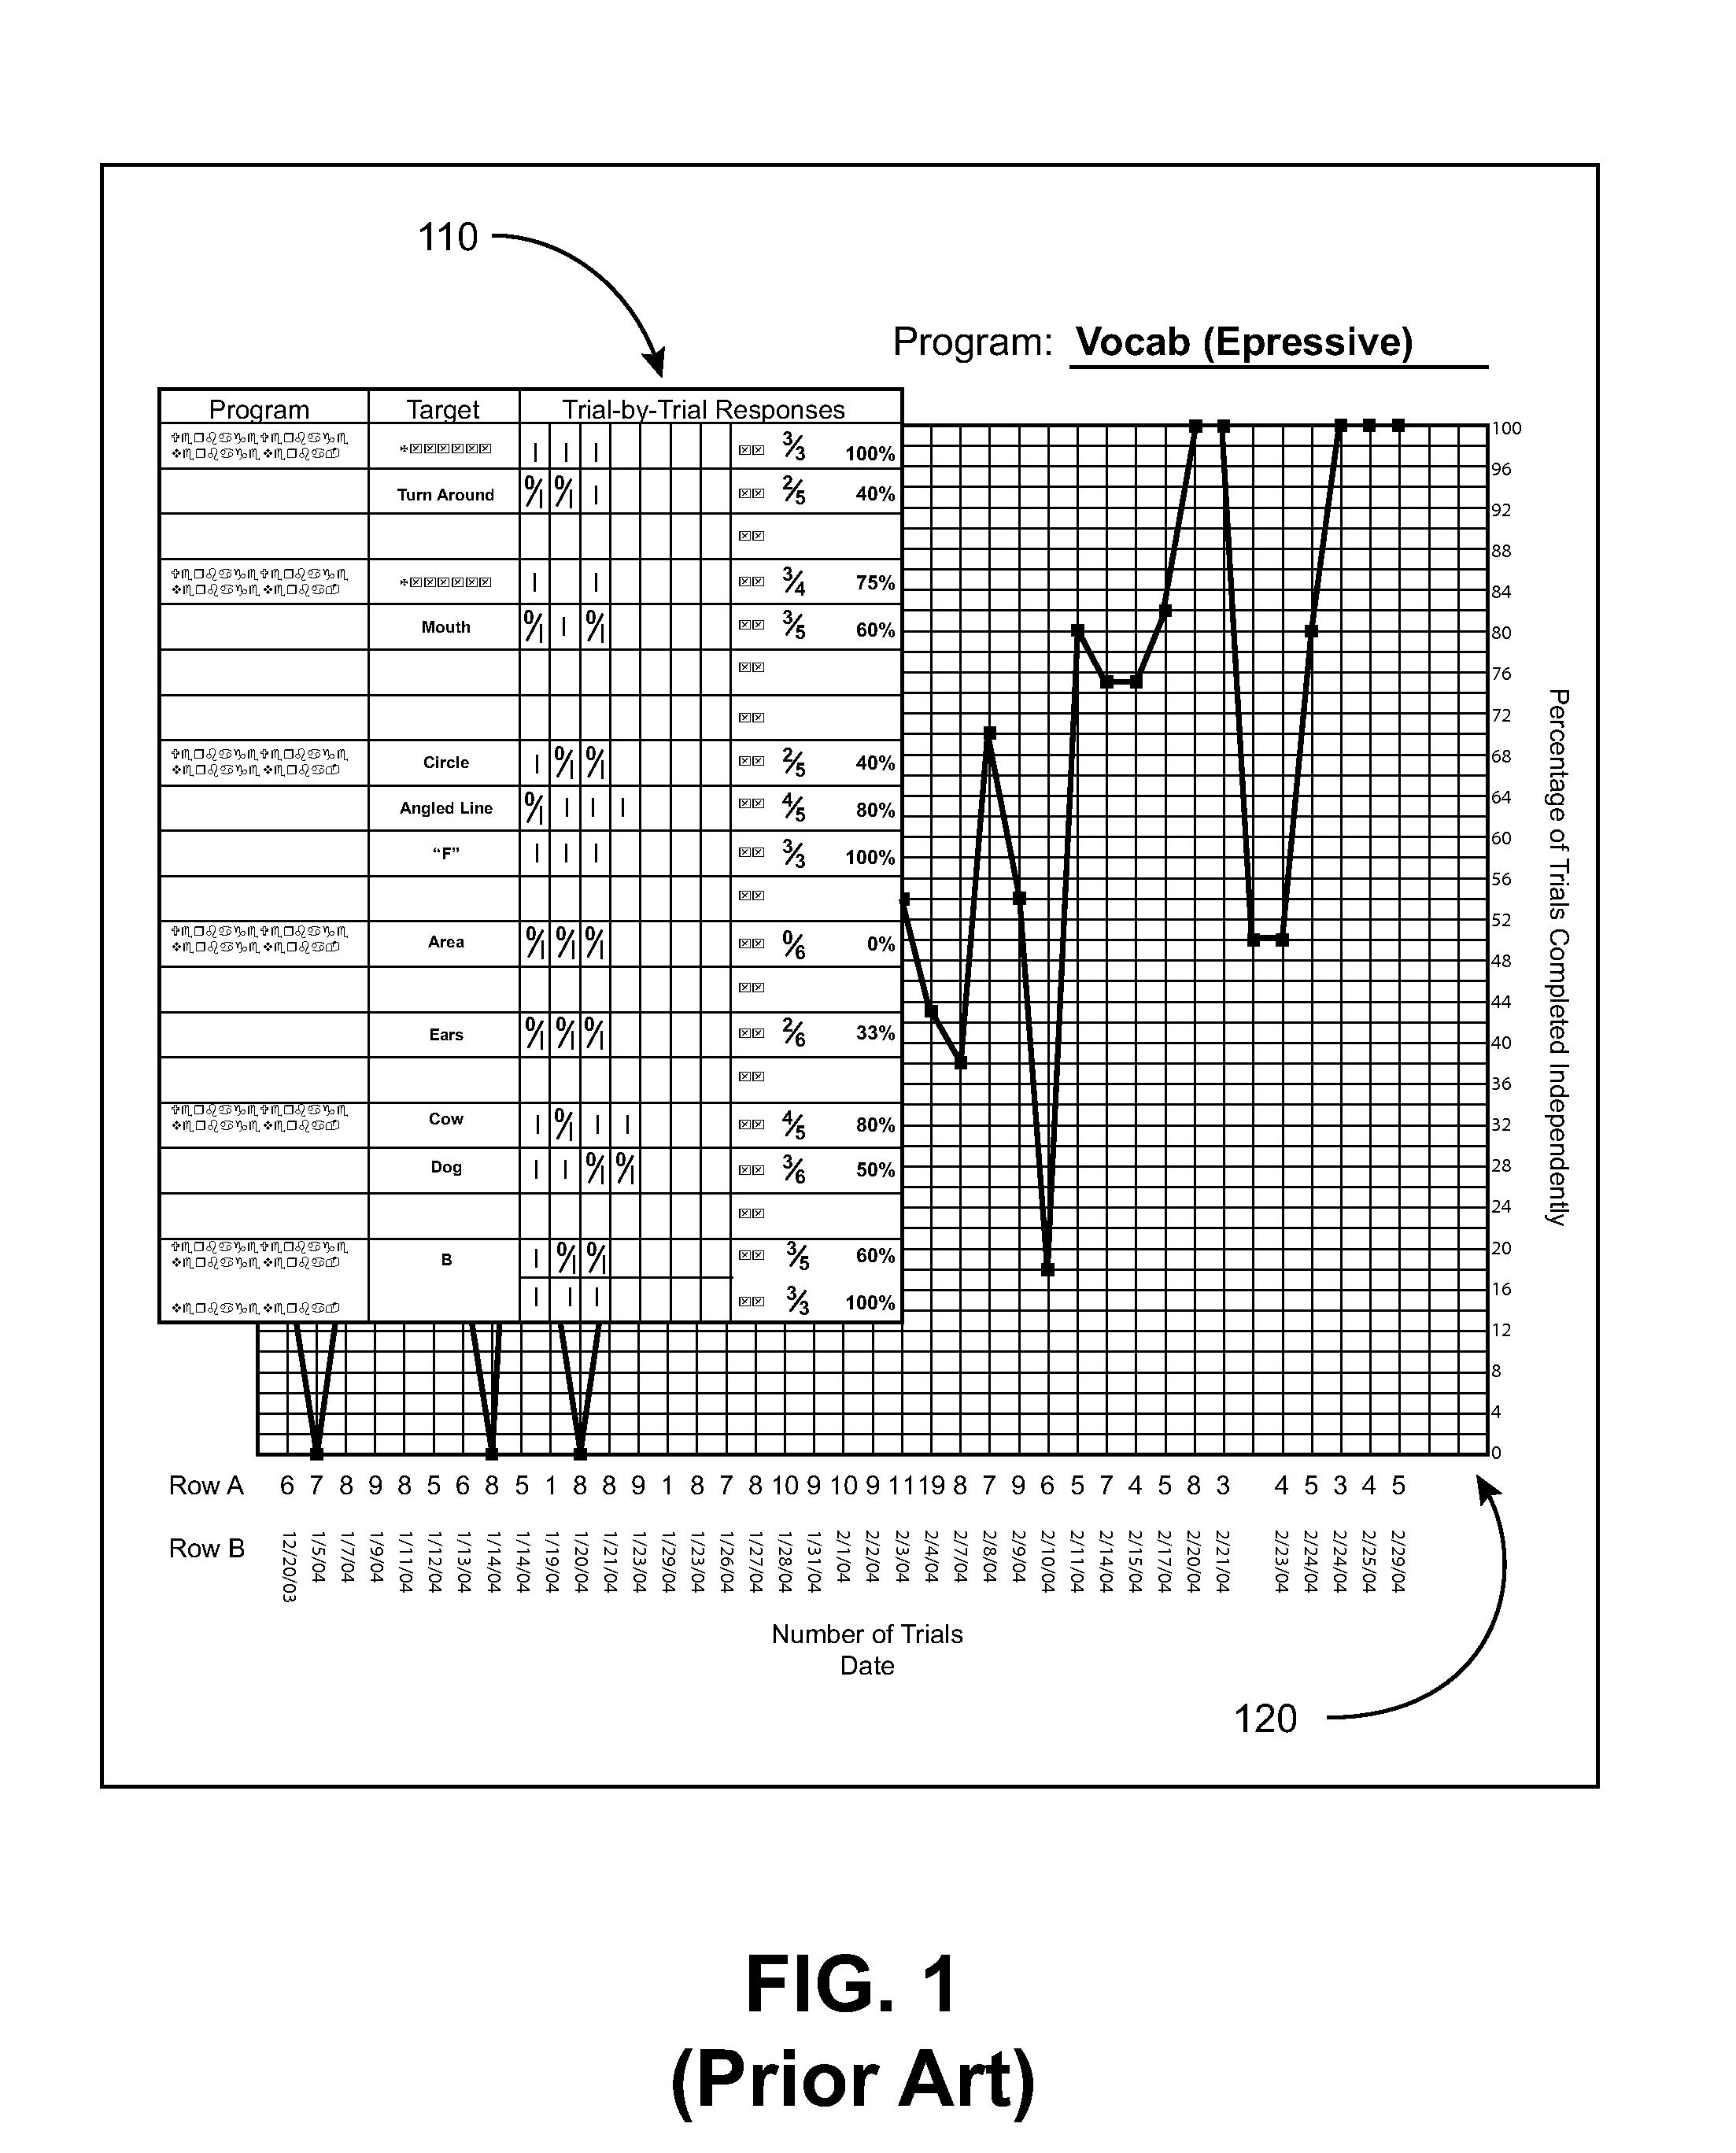 Method and computer program product for synchronizing, displaying, and providing access to data collected from various media